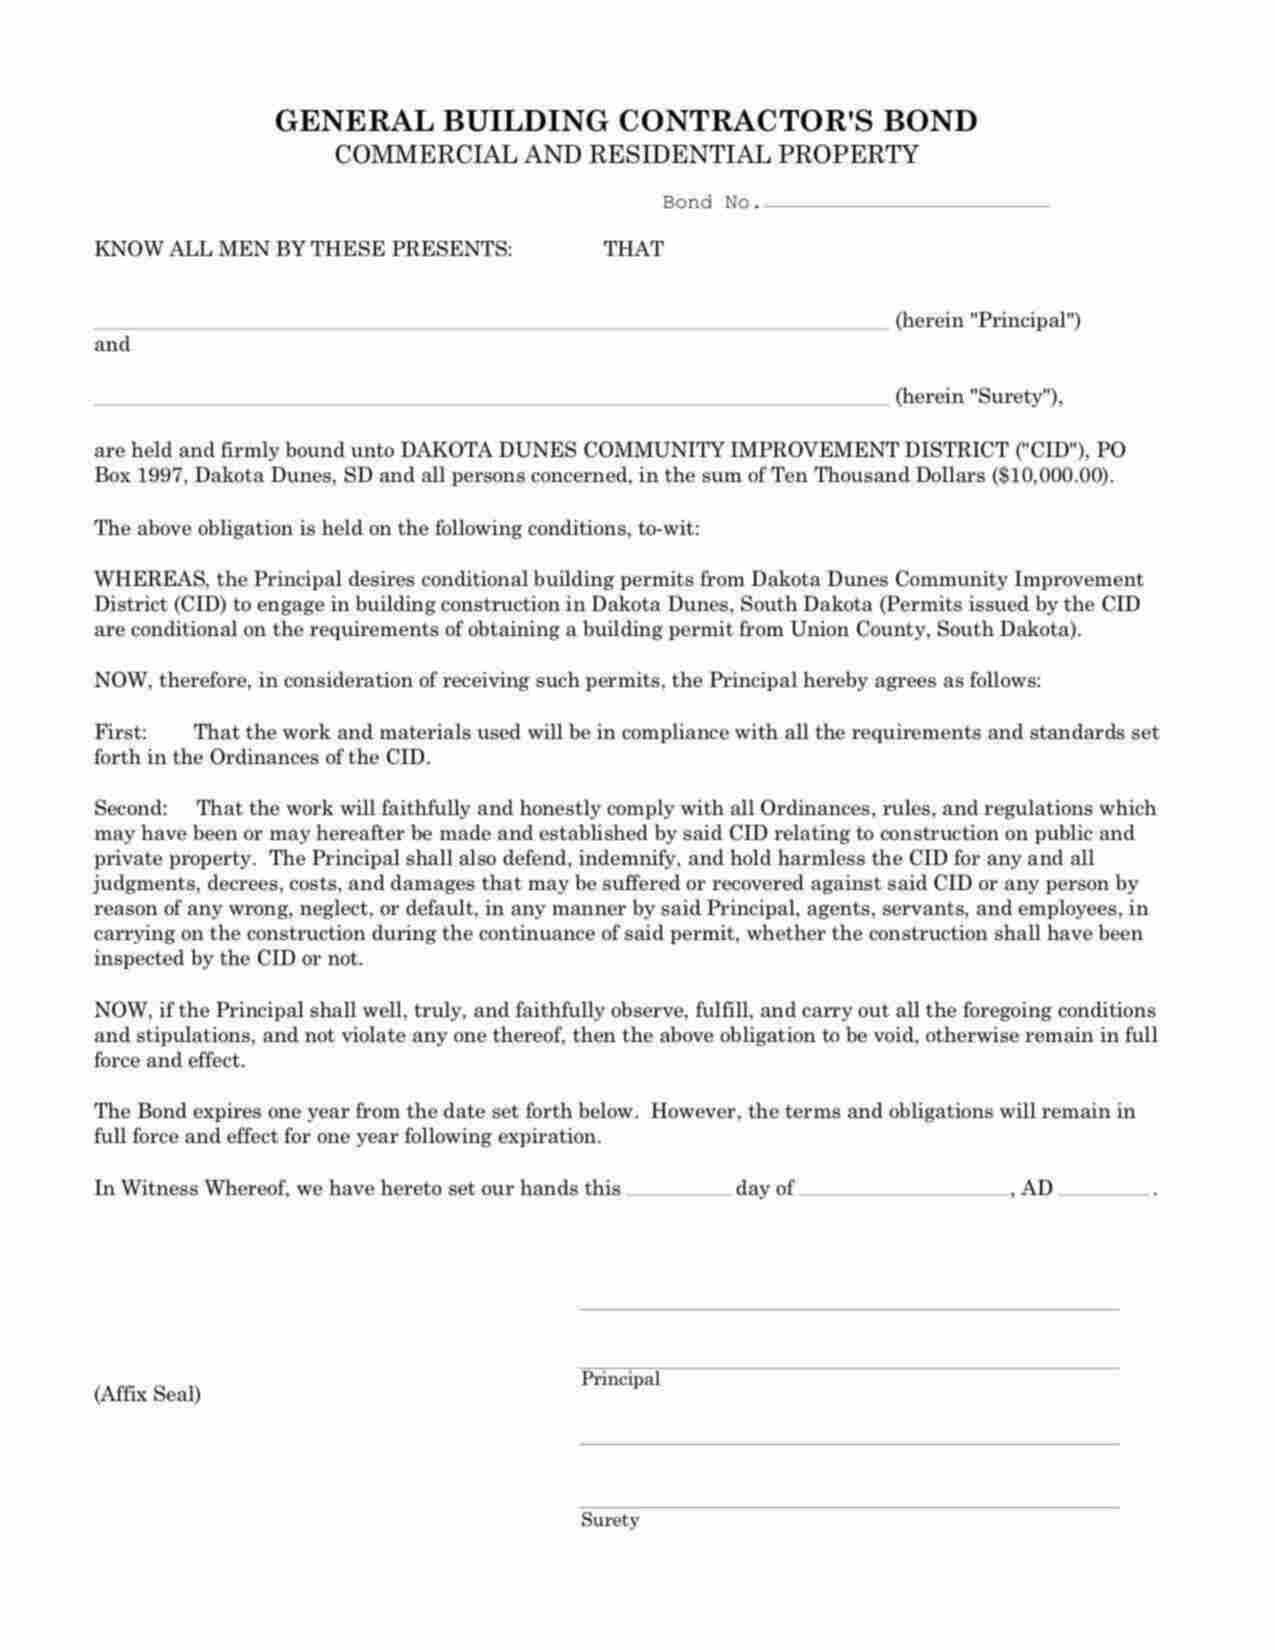 South Dakota Commercial and Residential Property Permit Bond Form